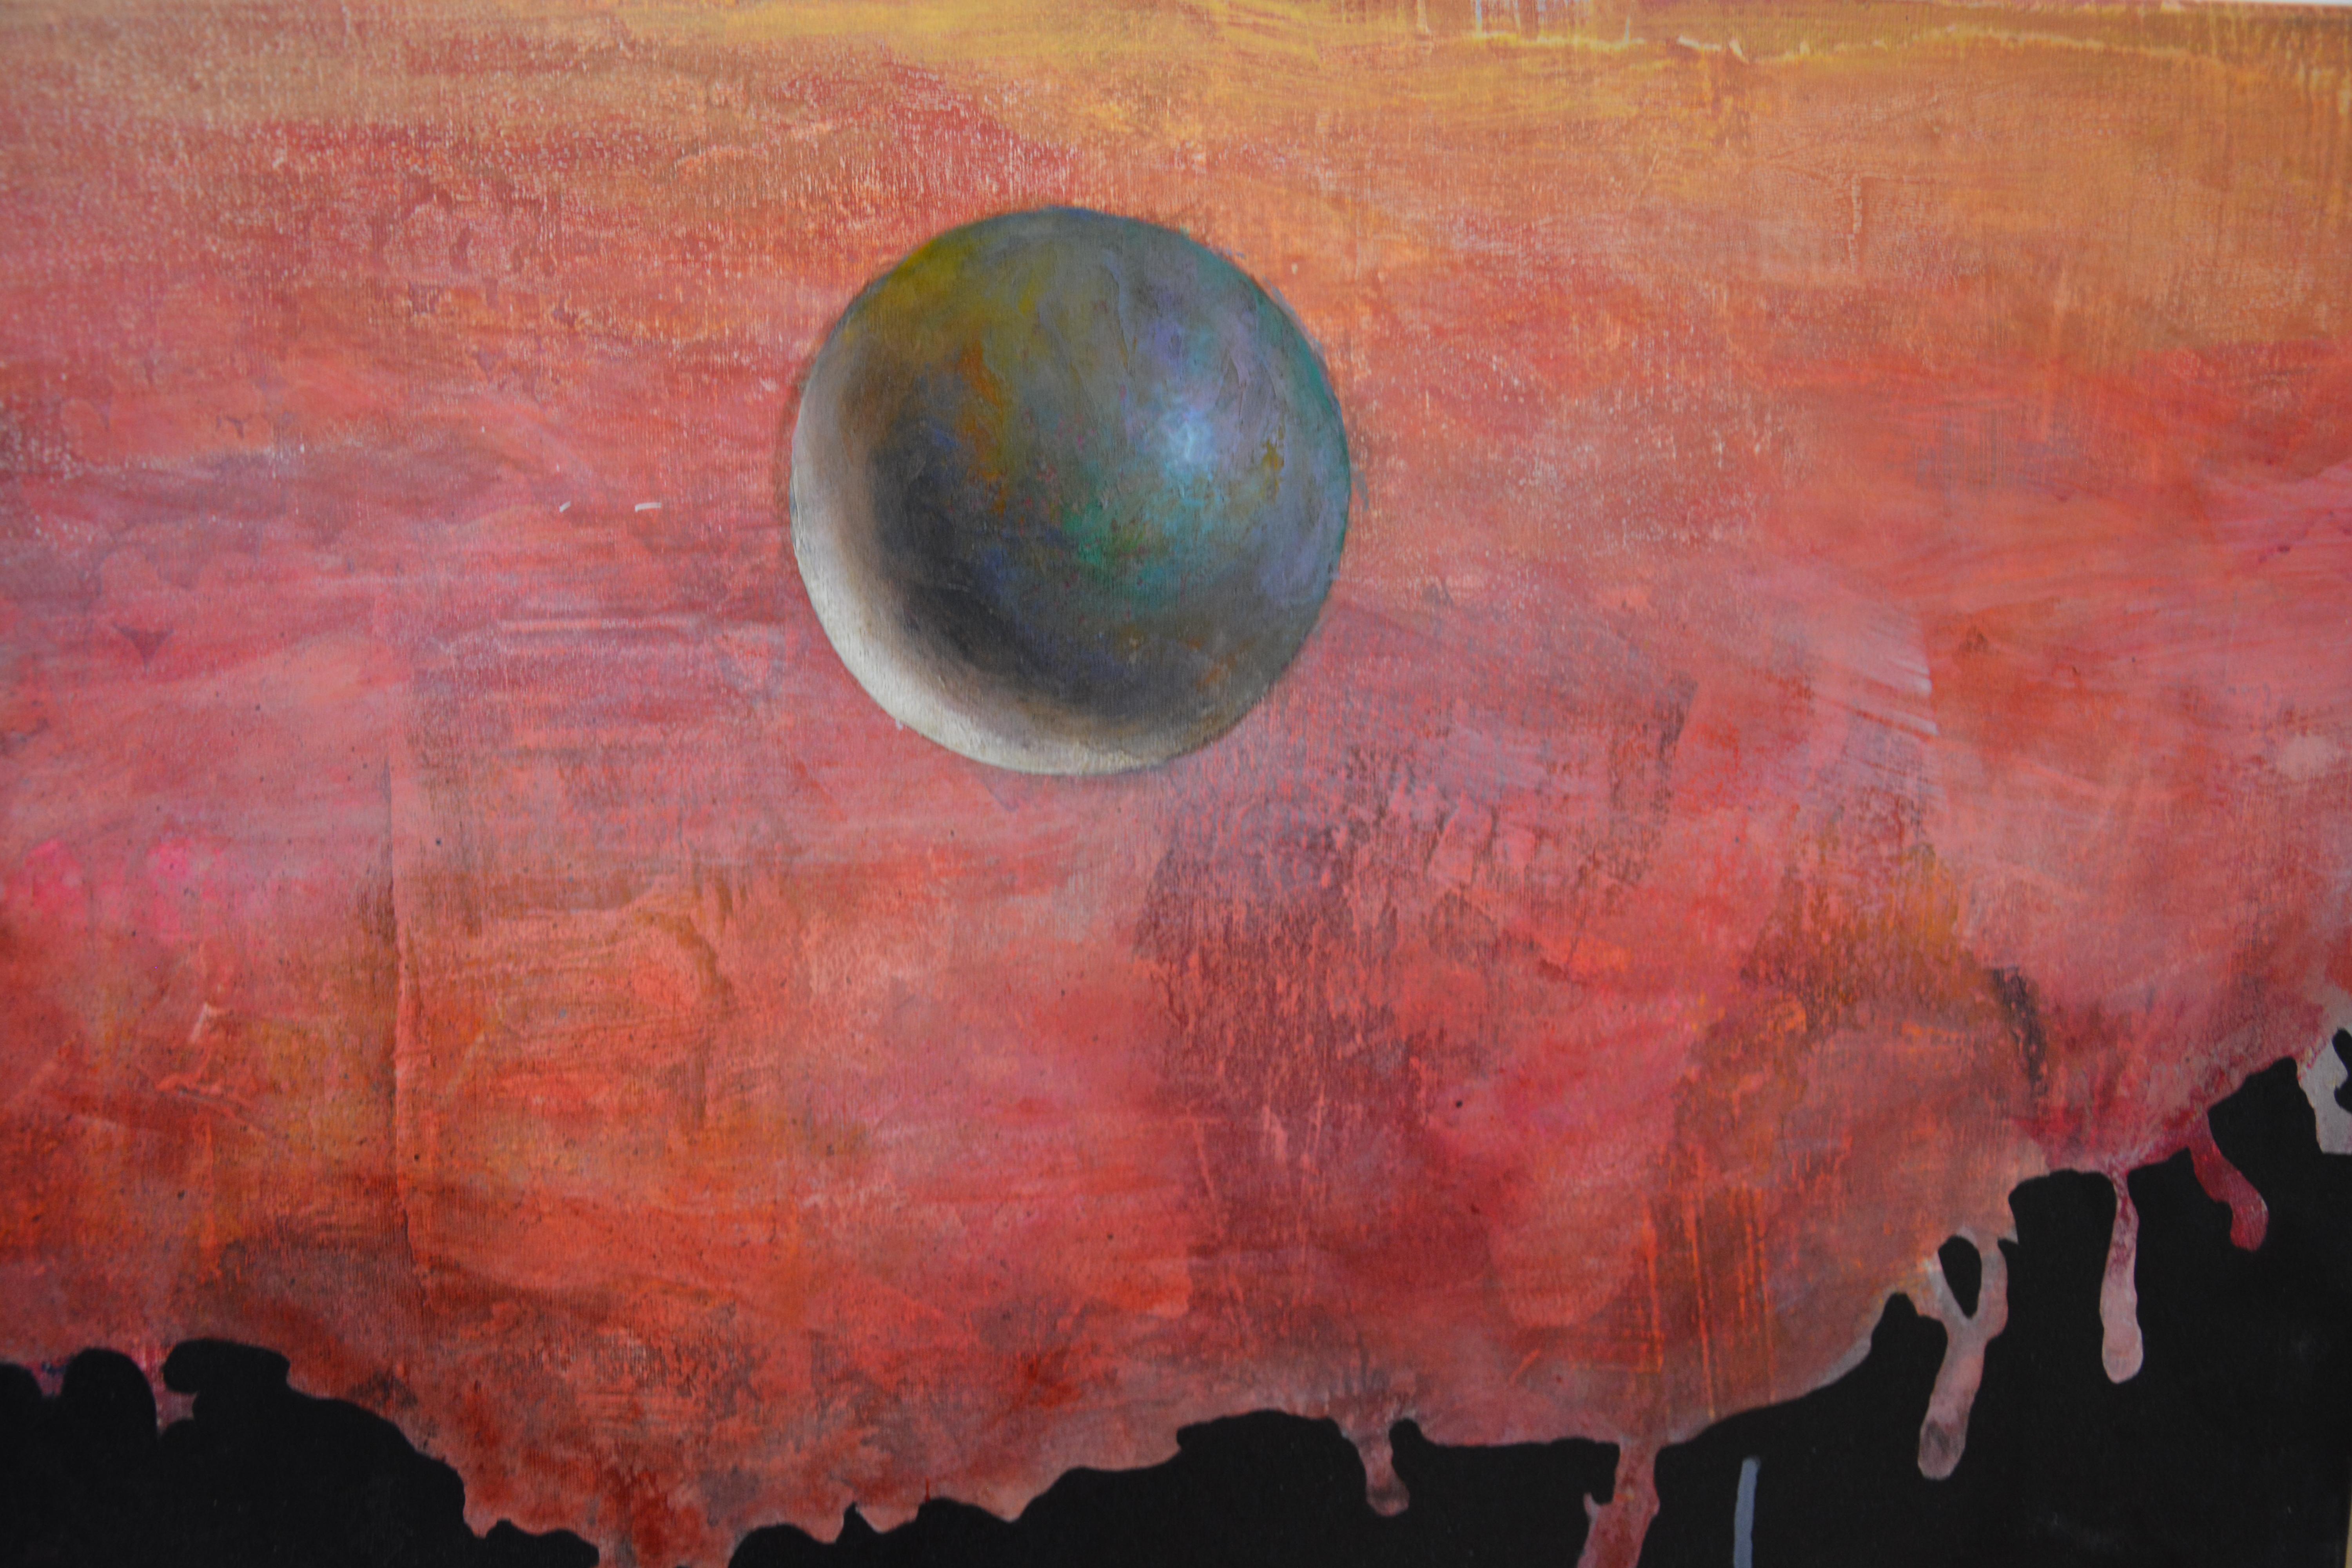 Creation - 21st Century, Abstract, Space, Blue, Red, Sphere, Drip, Georgian - Painting by Gogi Gelantia